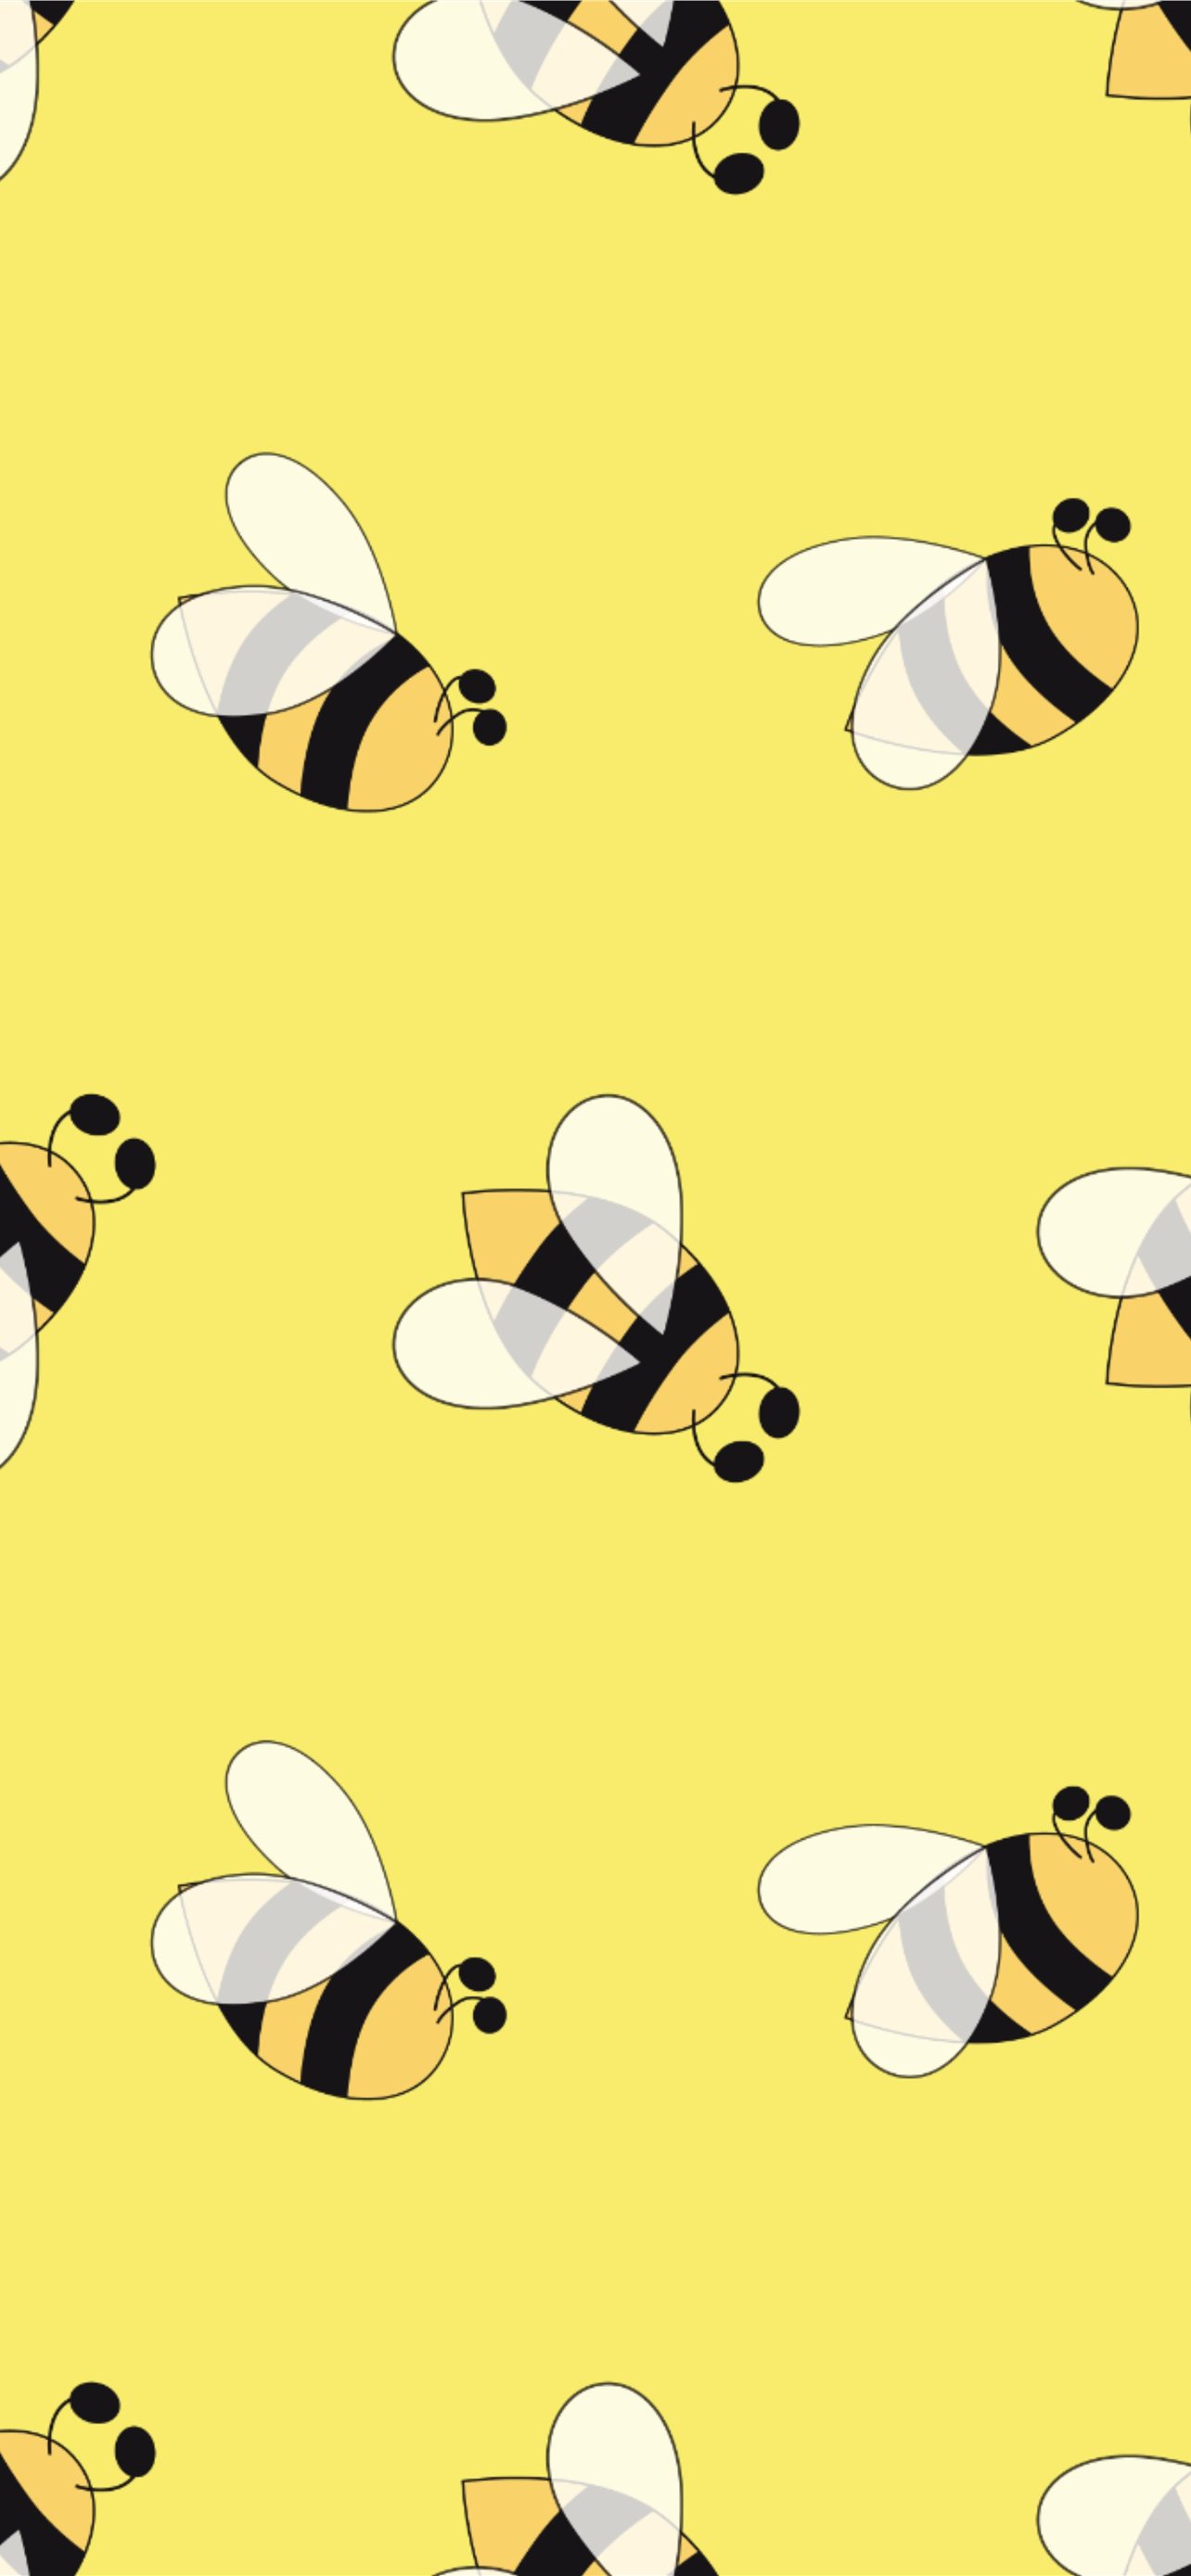 A yellow background with bees on it - Bee